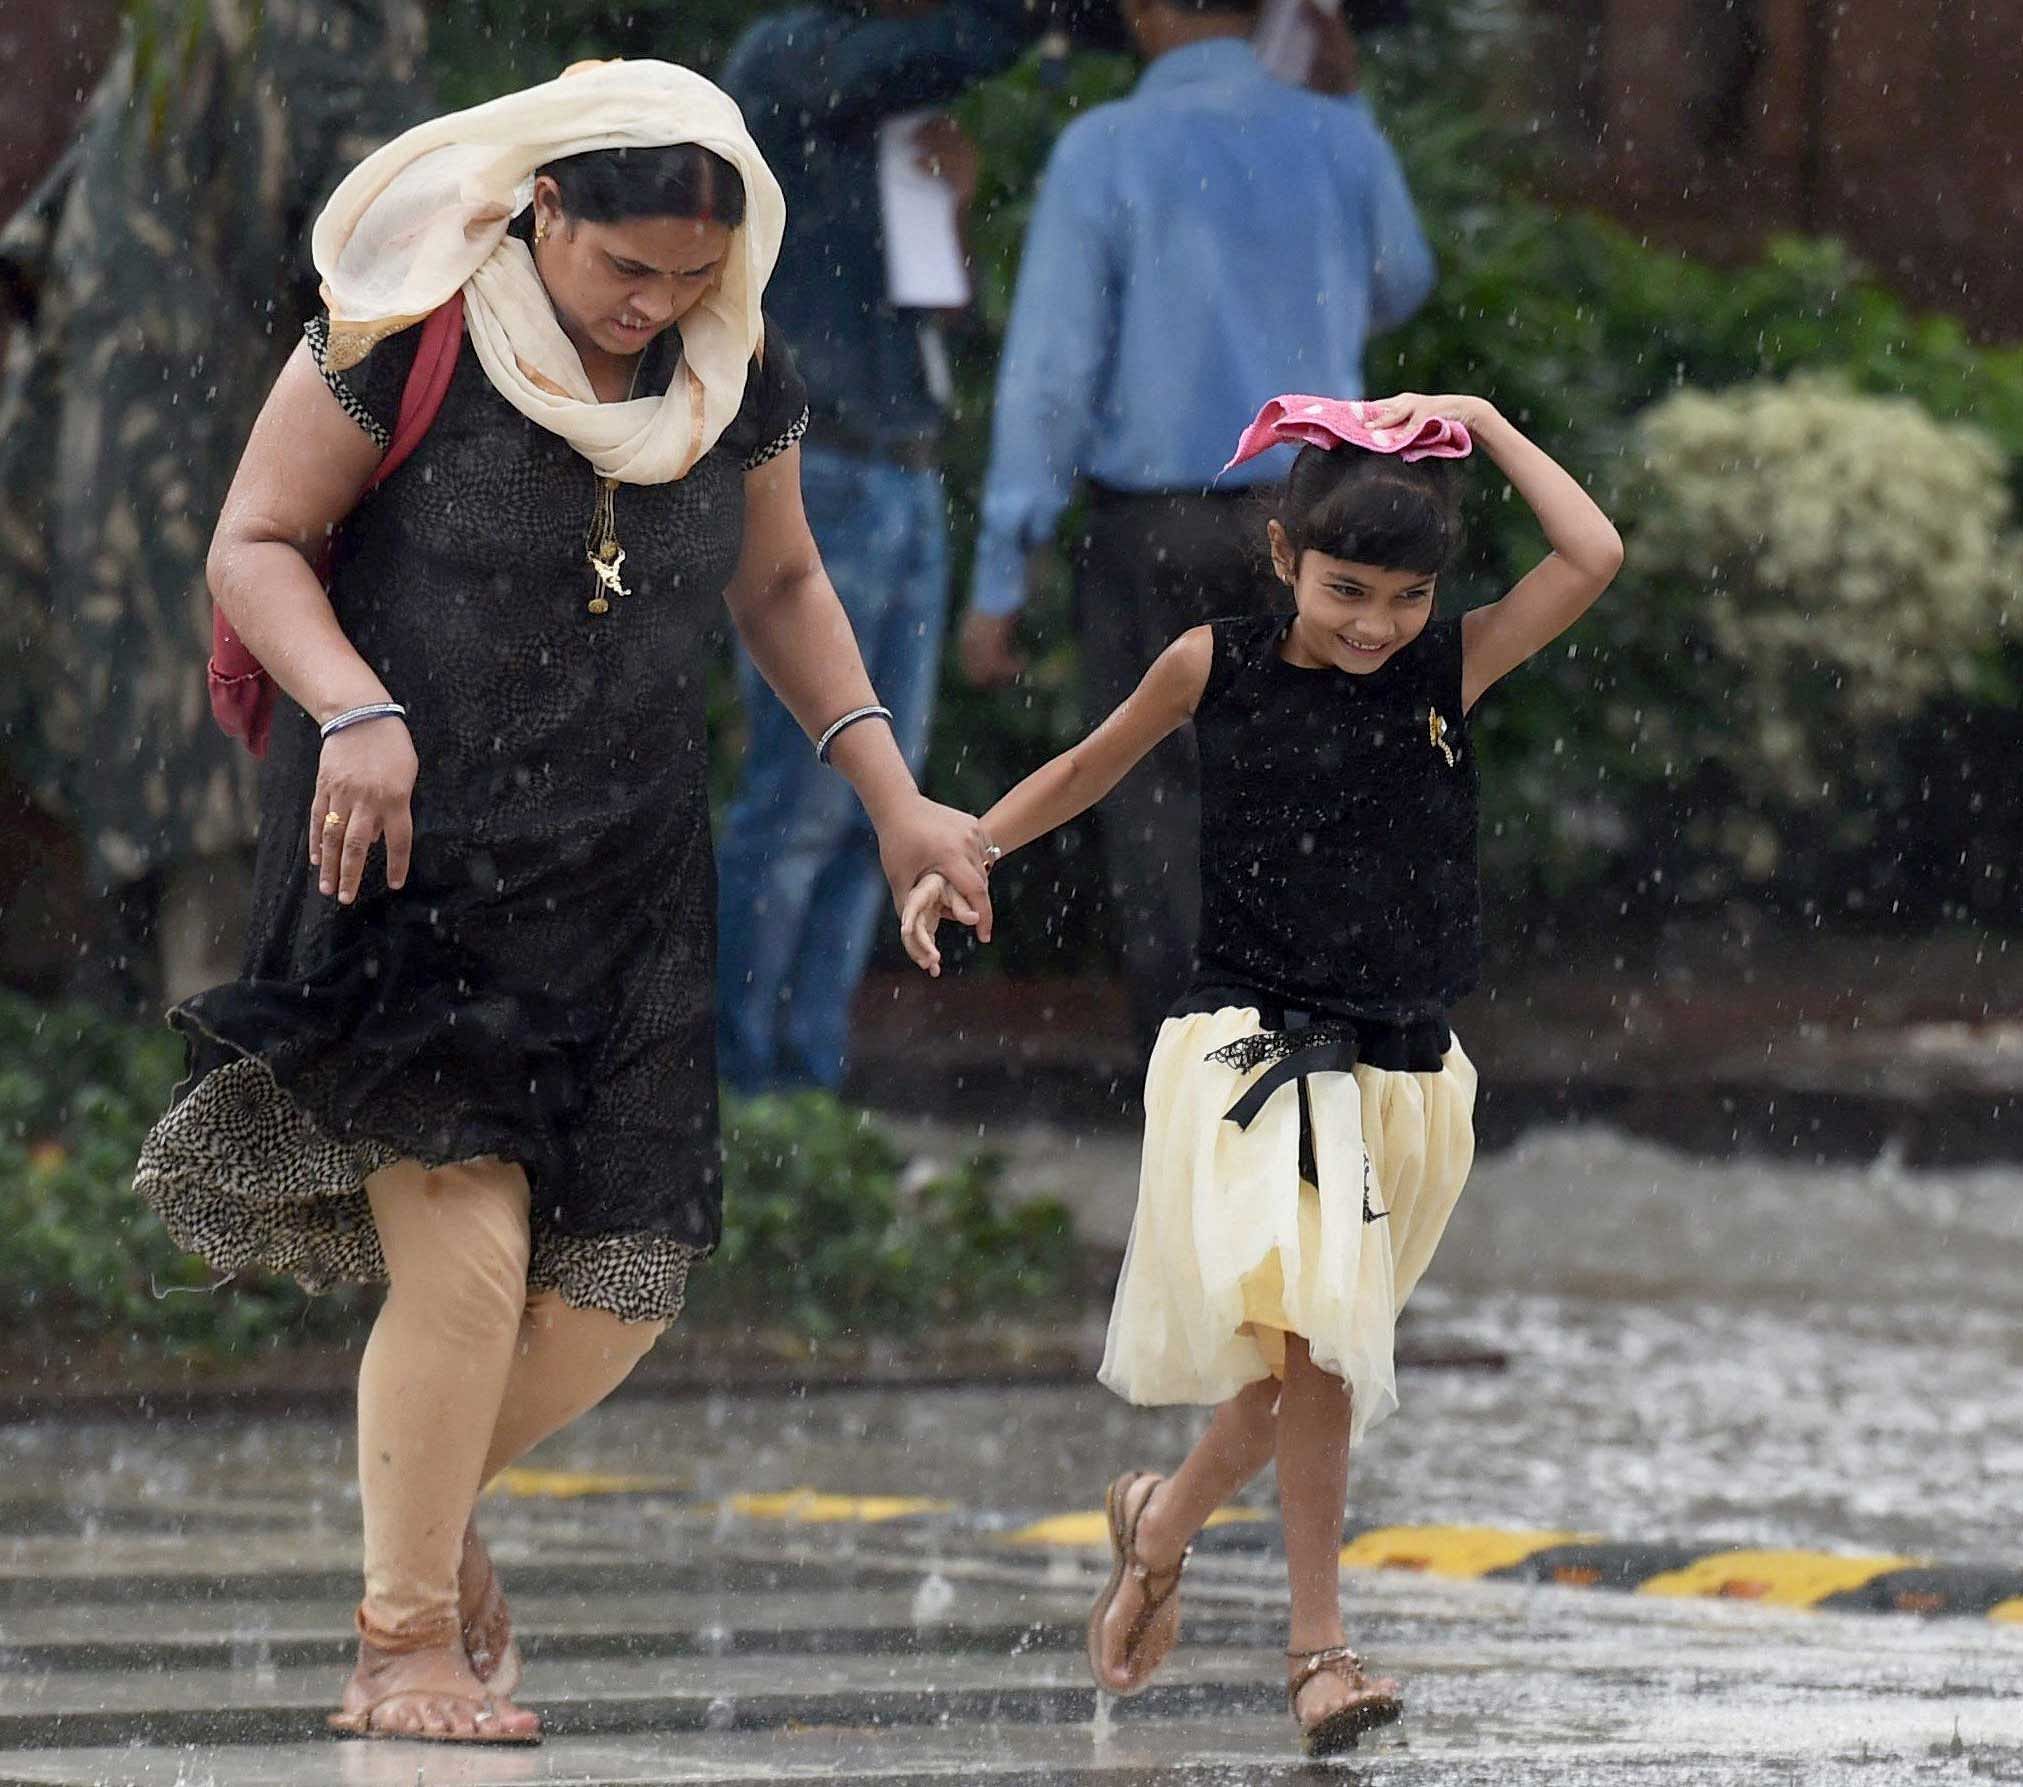 Rain to continue for next two days, says IMD